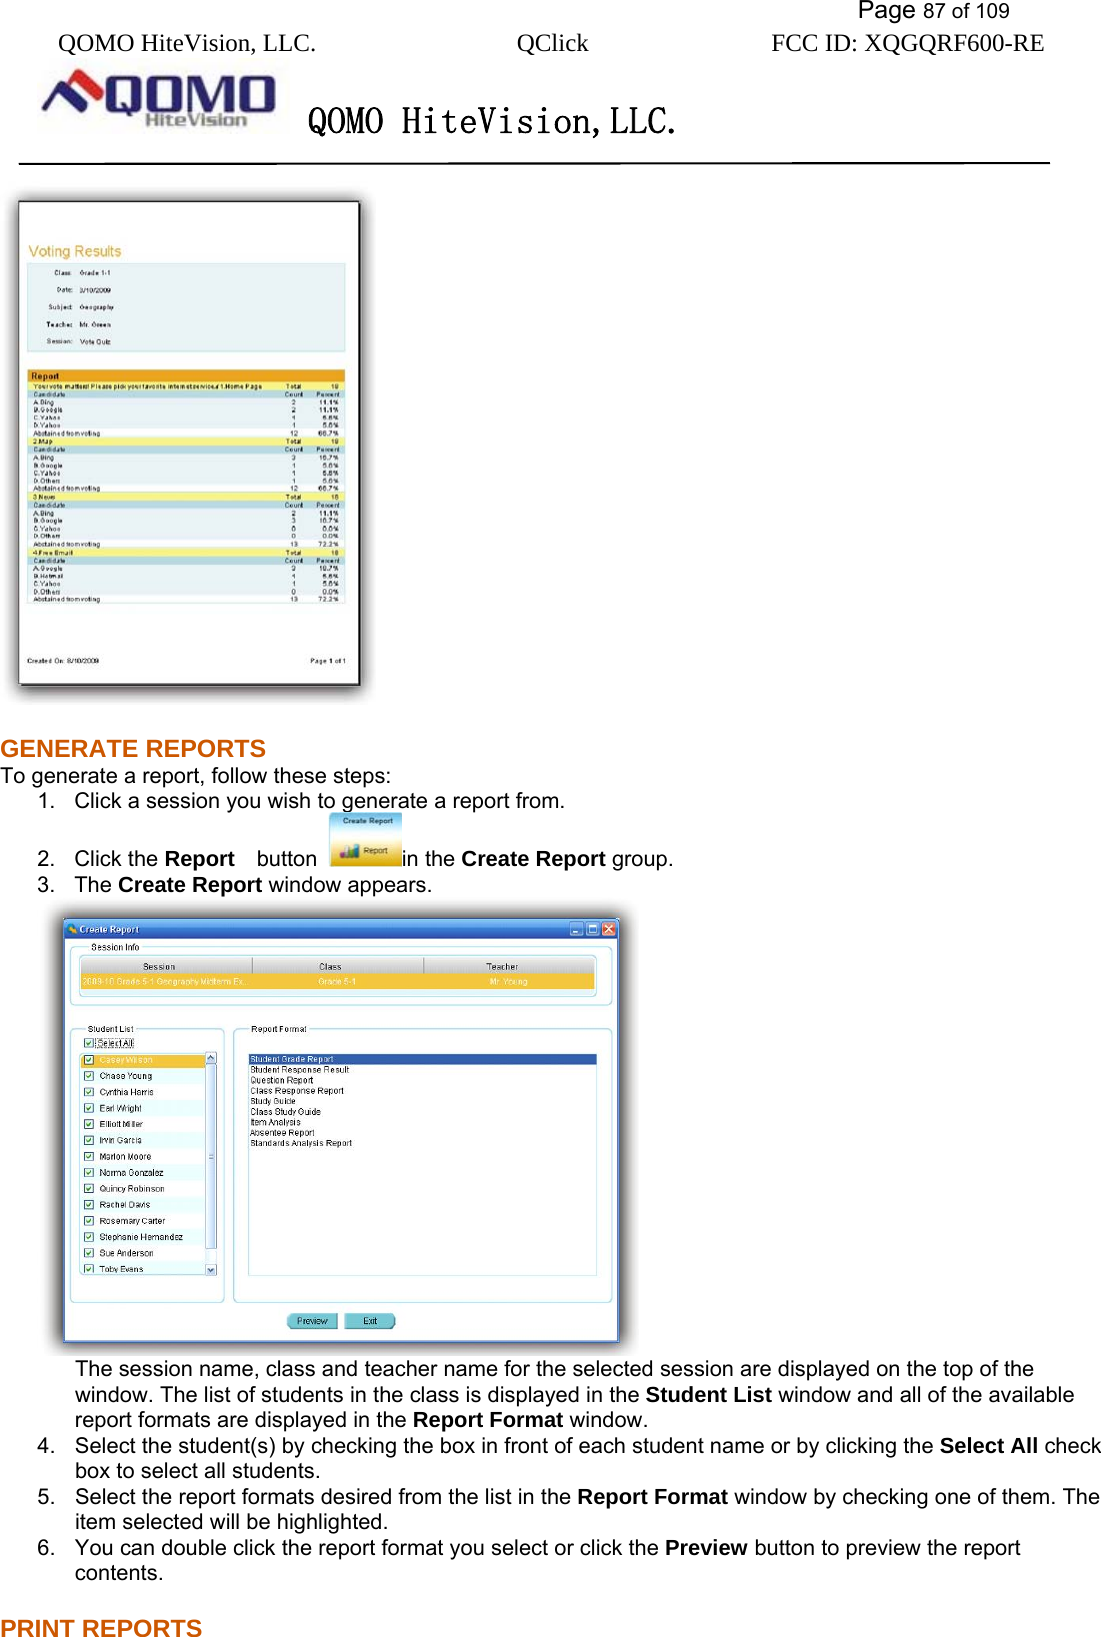           Page 87 of 109 QOMO HiteVision, LLC.  QClick        FCC ID: XQGQRF600-RE     QOMO HiteVision,LLC.    GENERATE REPORTS To generate a report, follow these steps: 1.  Click a session you wish to generate a report from. 2. Click the Report   button  in the Create Report group. 3. The Create Report window appears.    The session name, class and teacher name for the selected session are displayed on the top of the window. The list of students in the class is displayed in the Student List window and all of the available report formats are displayed in the Report Format window. 4.  Select the student(s) by checking the box in front of each student name or by clicking the Select All check box to select all students. 5.  Select the report formats desired from the list in the Report Format window by checking one of them. The item selected will be highlighted. 6.  You can double click the report format you select or click the Preview button to preview the report contents. PRINT REPORTS 